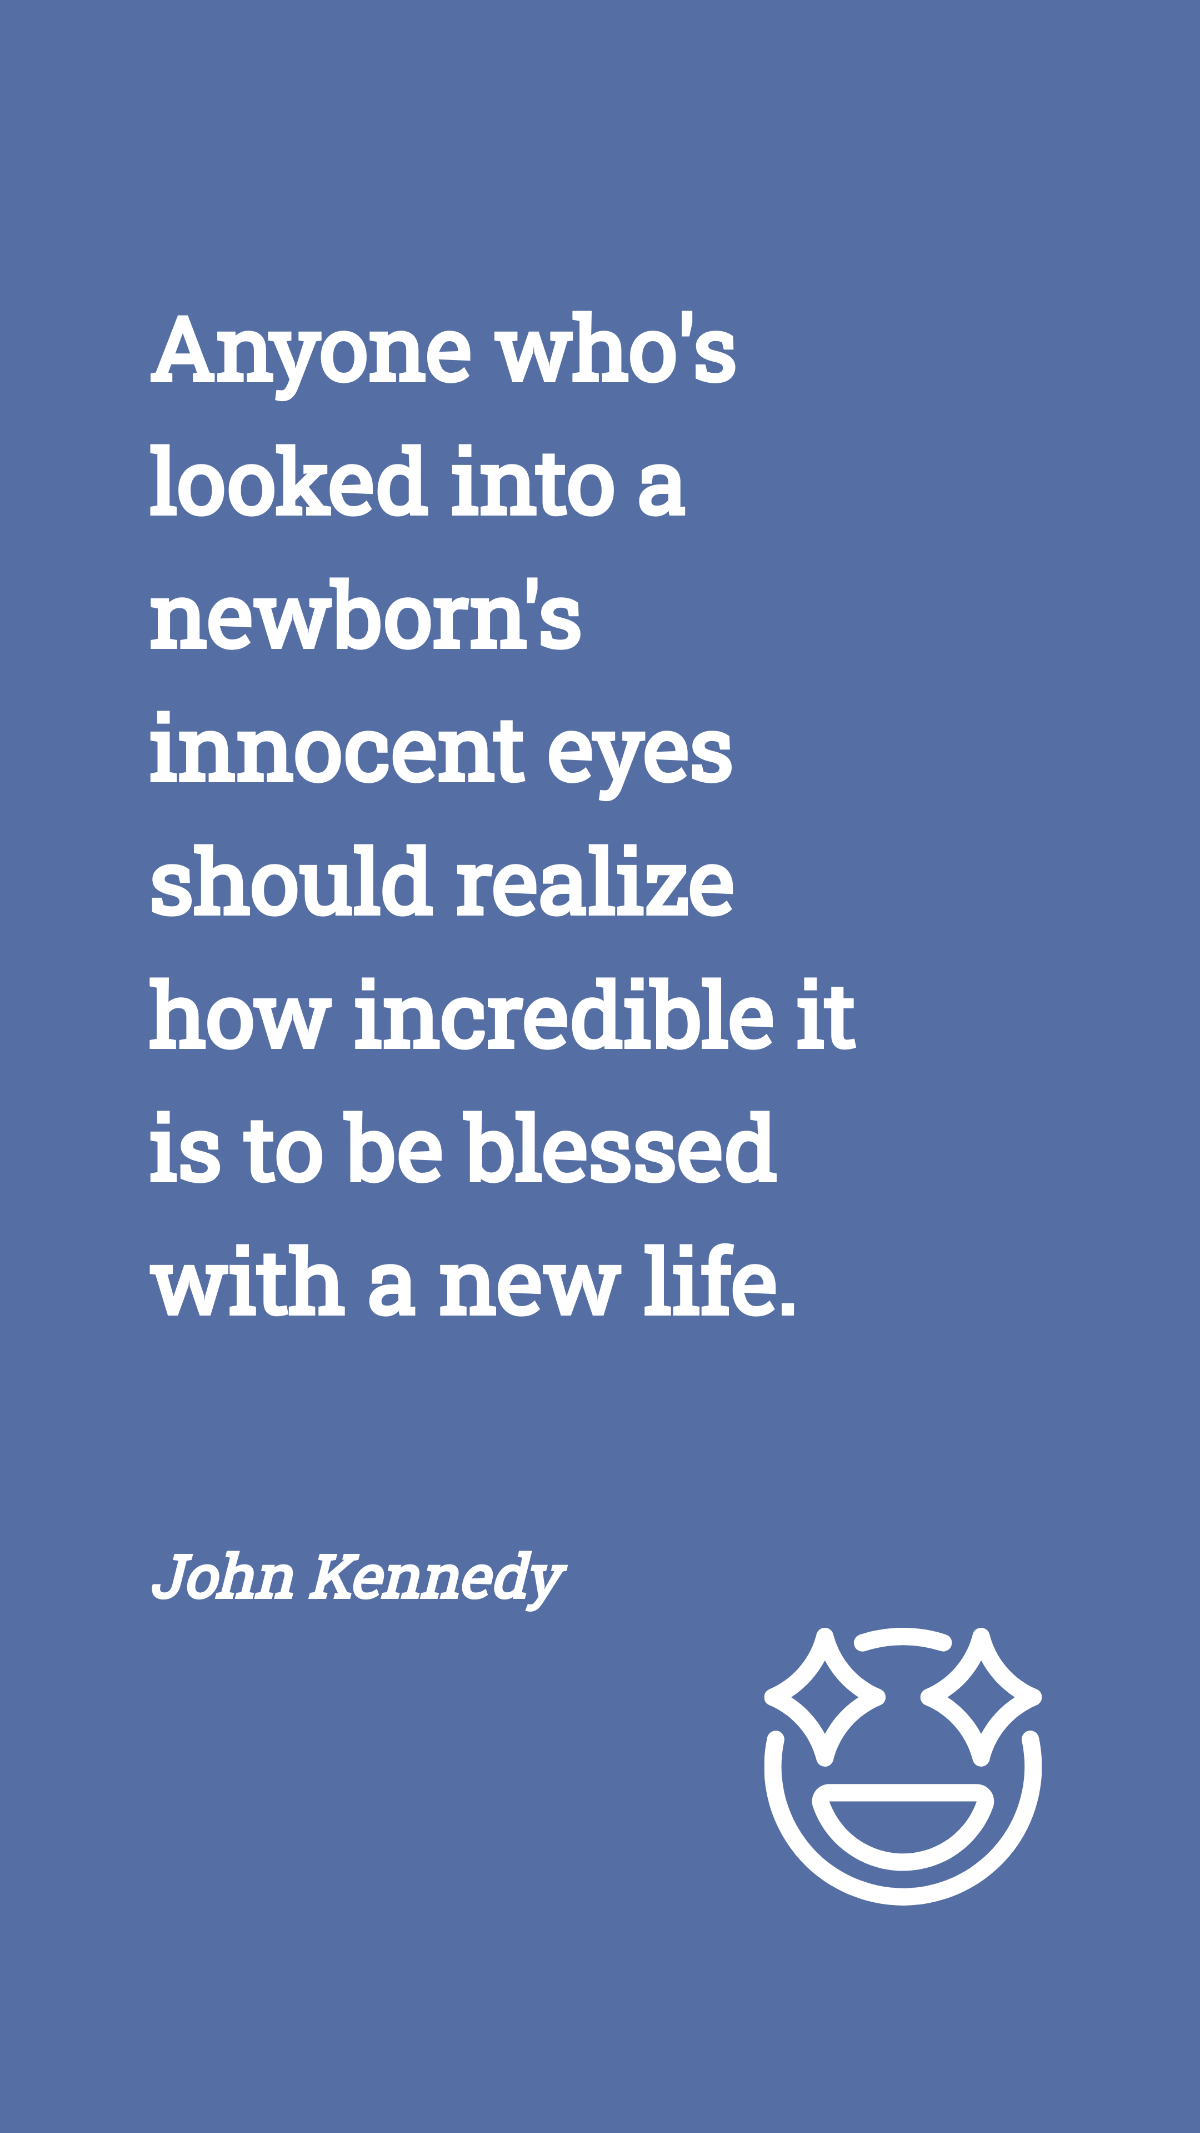 Free John Kennedy - Anyone who's looked into a newborn's innocent eyes should realize how incredible it is to be blessed with a new life. Template